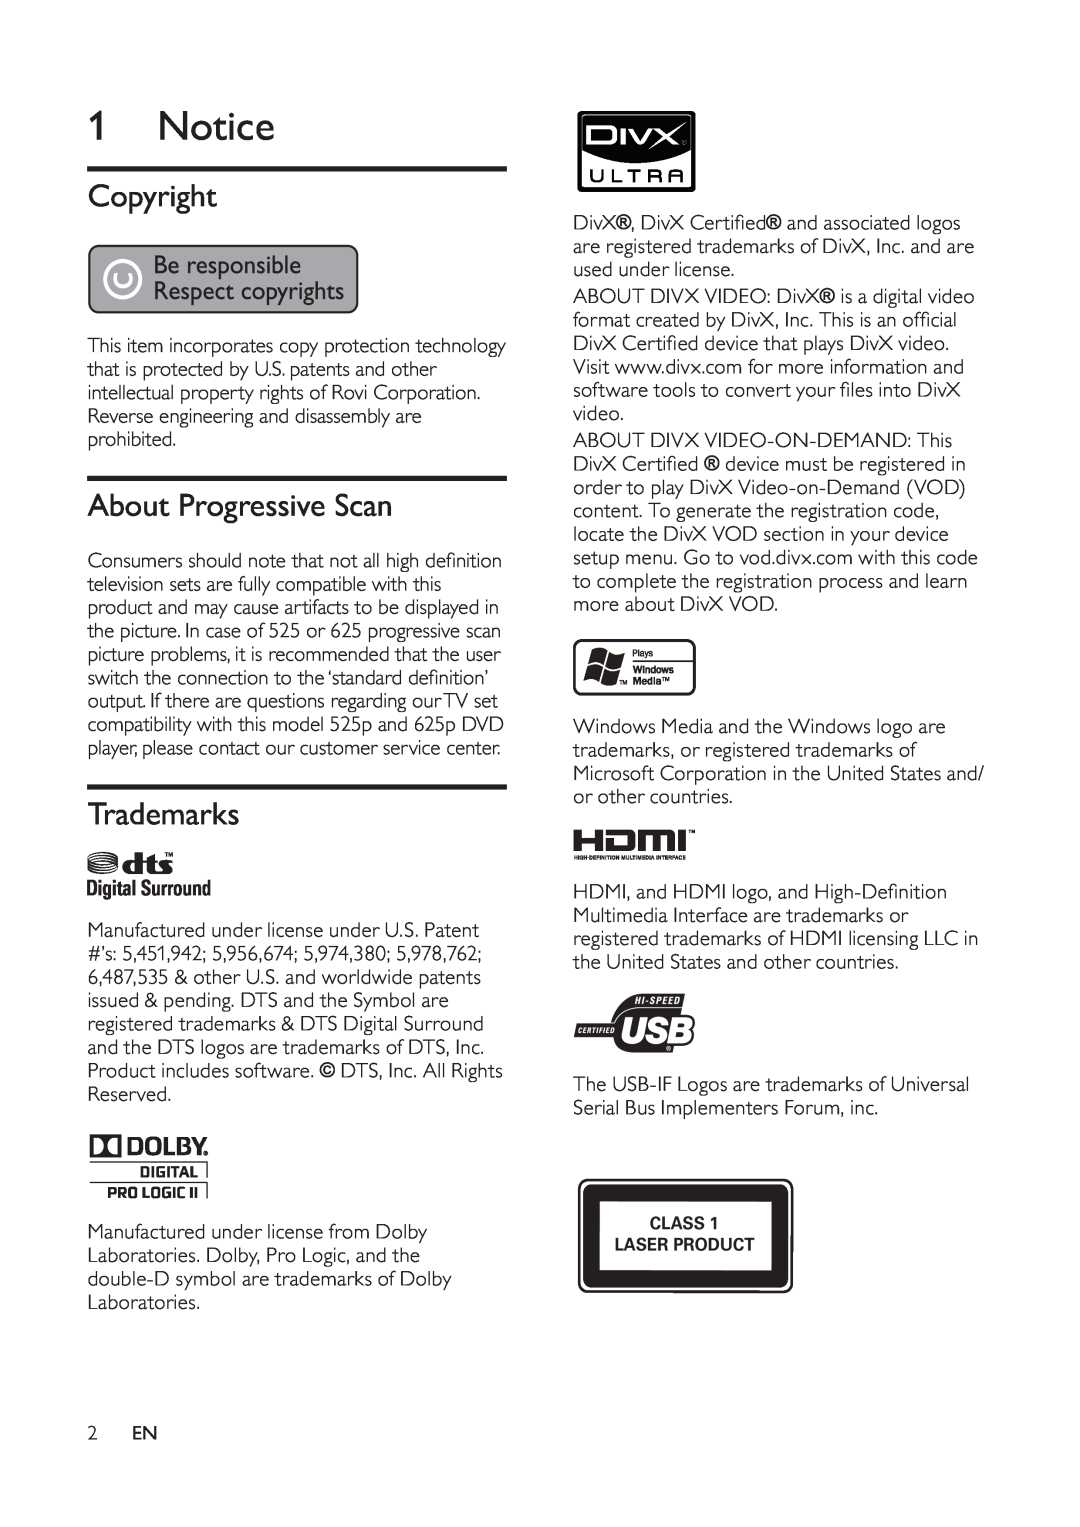 Philips HTS5530 user manual Notice, Copyright, About Progressive Scan, Trademarks 